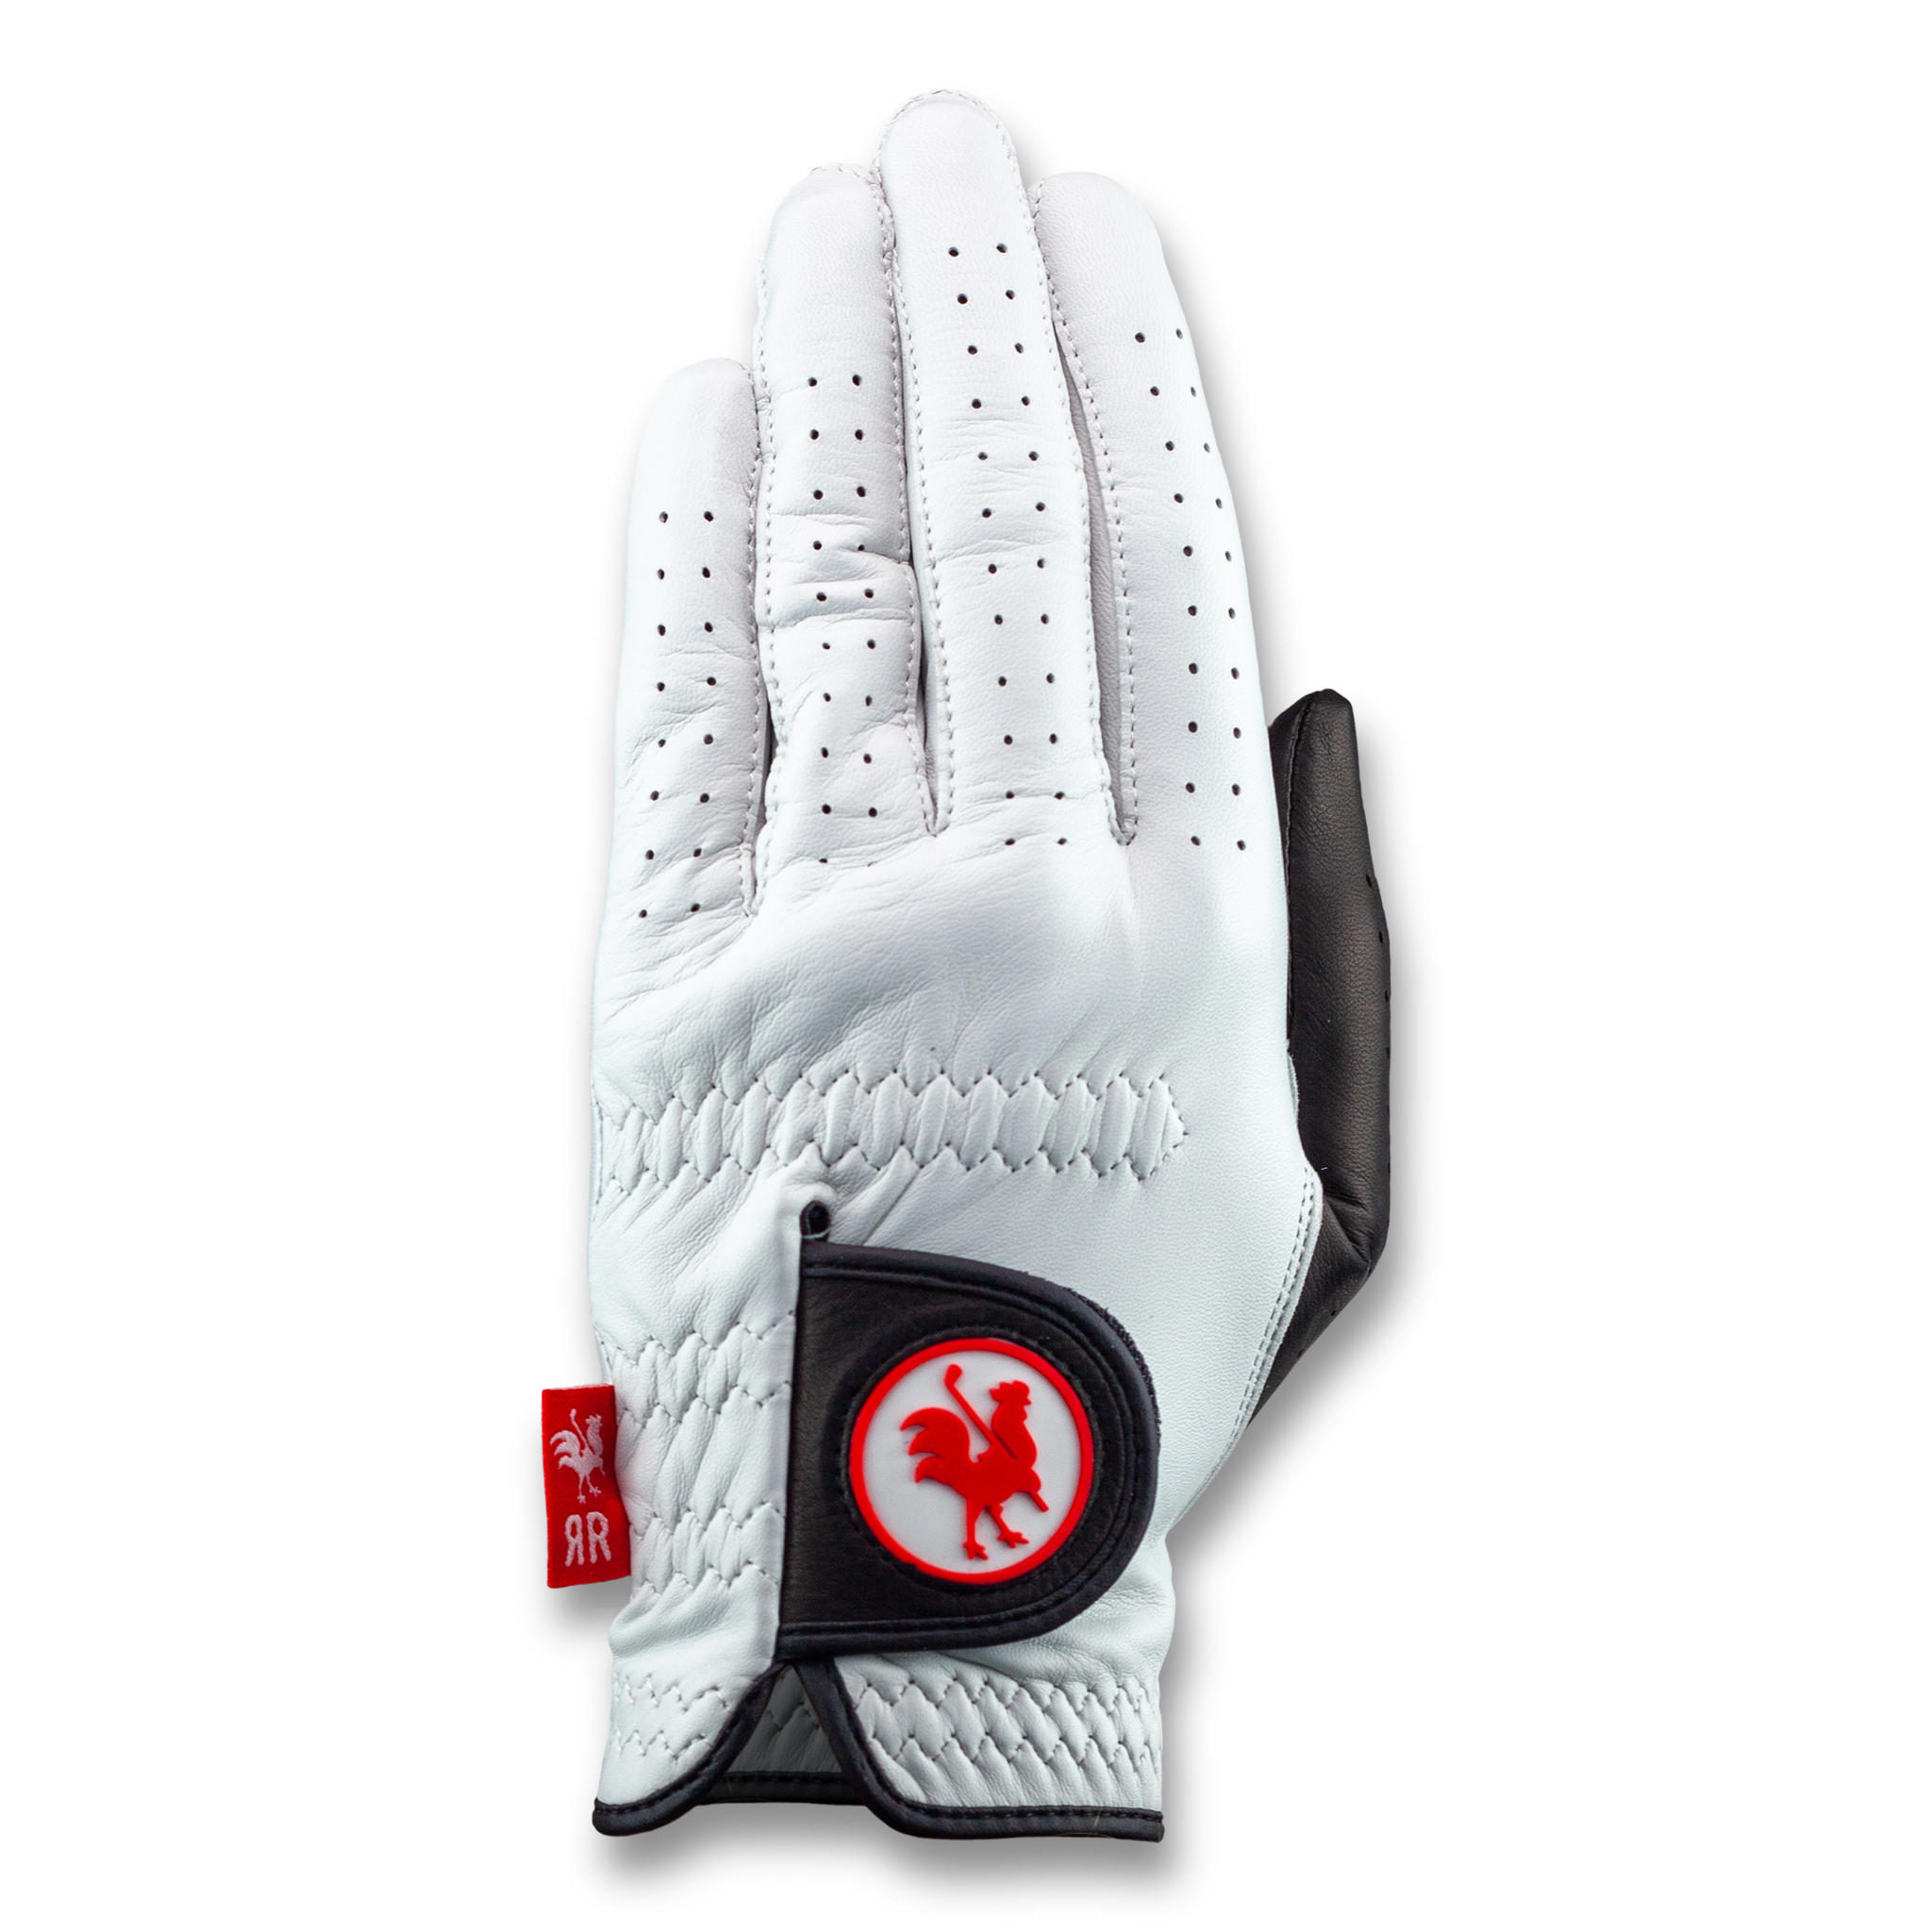 The Wing golf glove back side